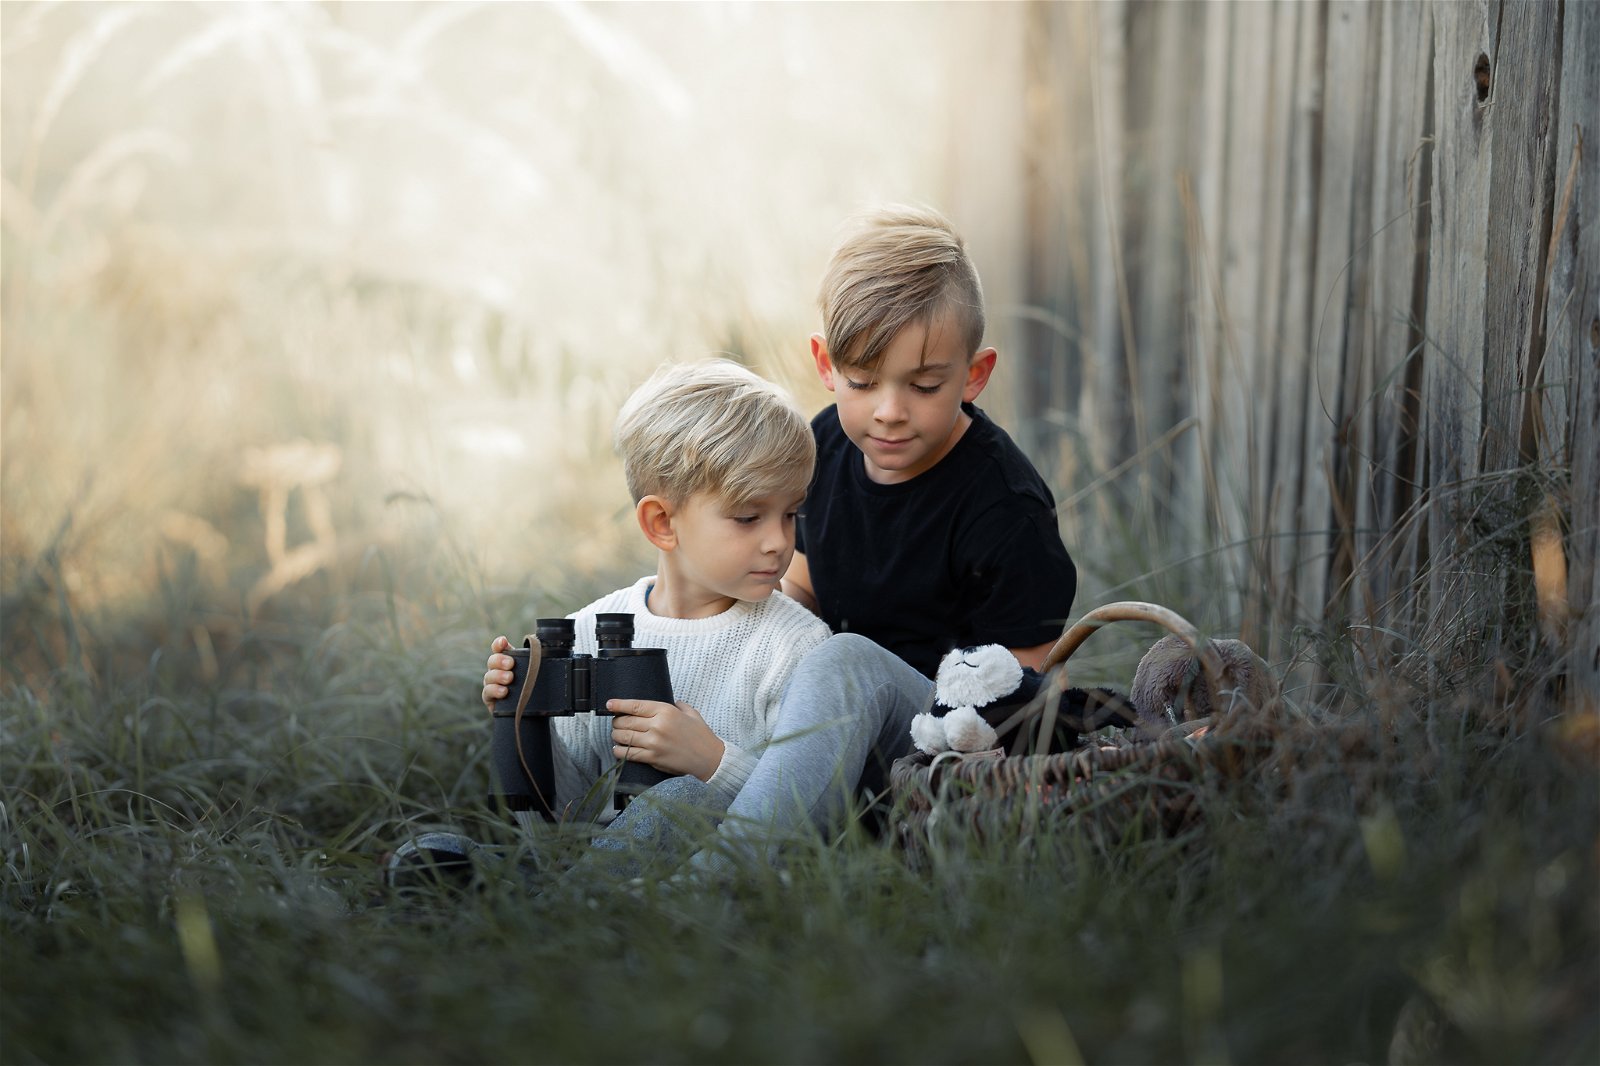 Photo of two children playing outdoors